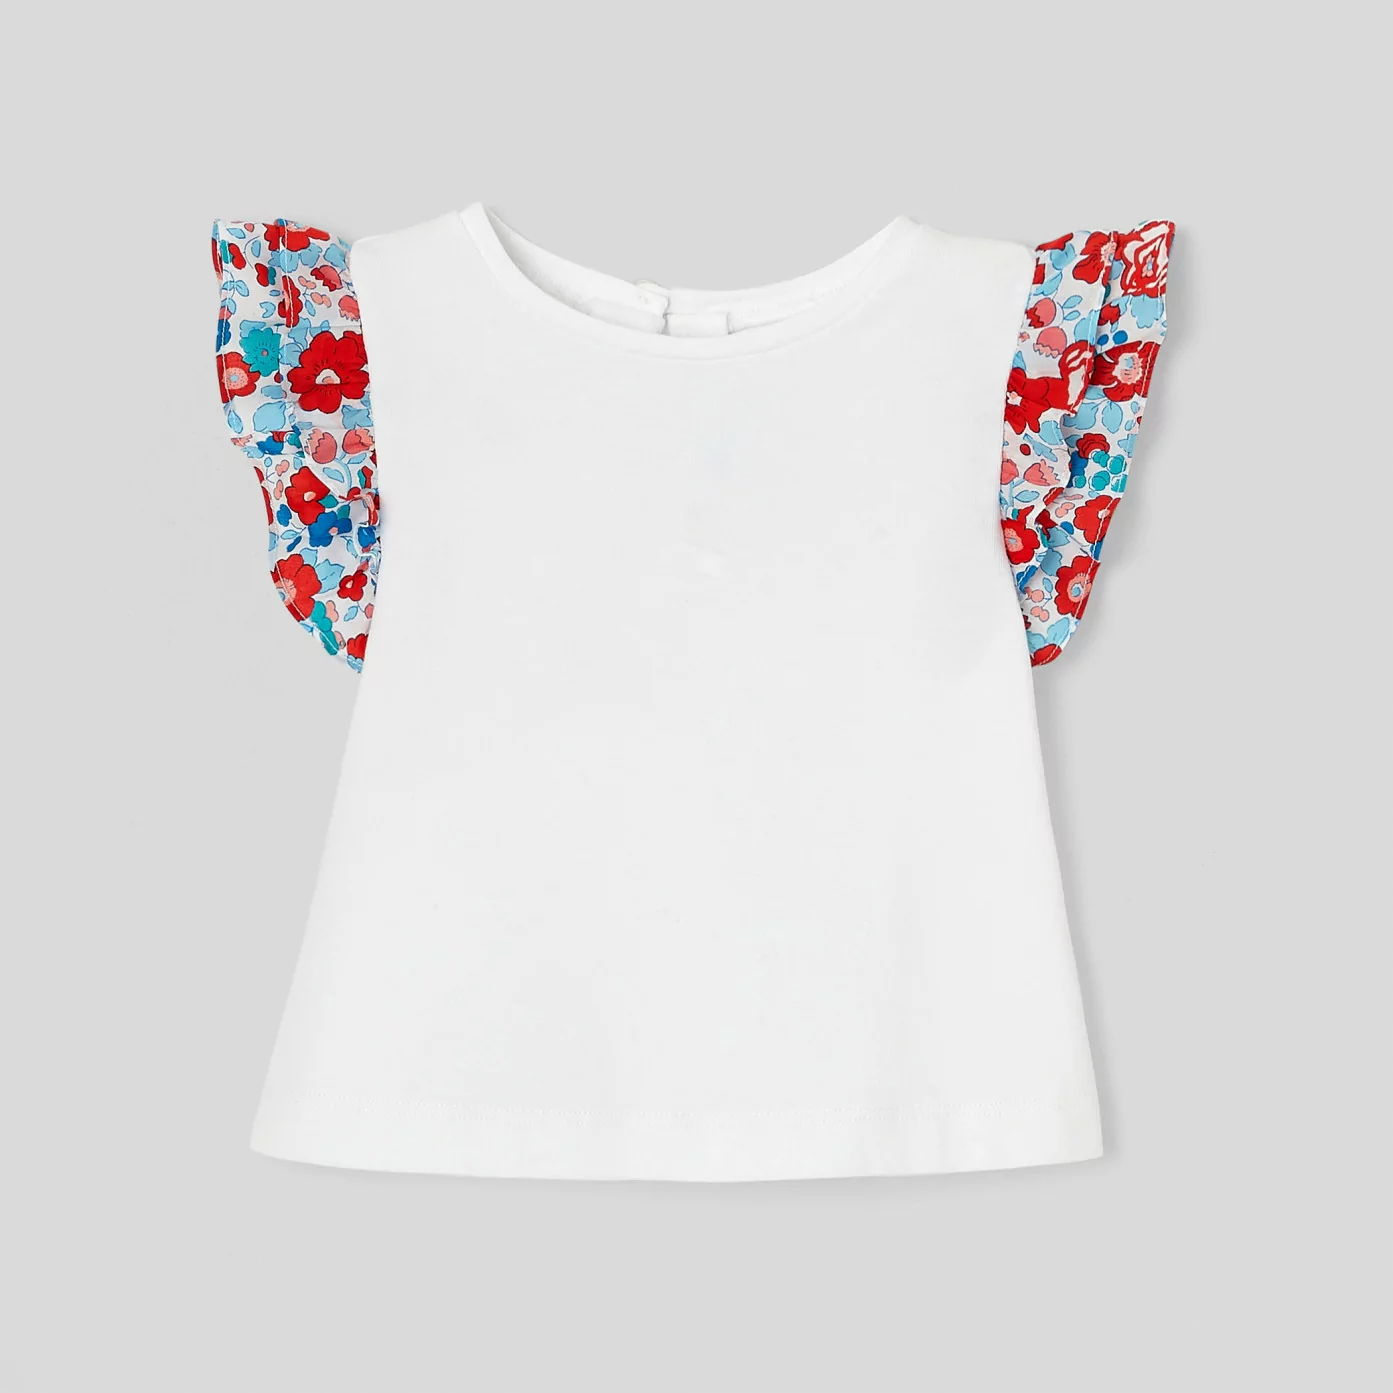 Toddler girl t-shirt with ruffled sleeves